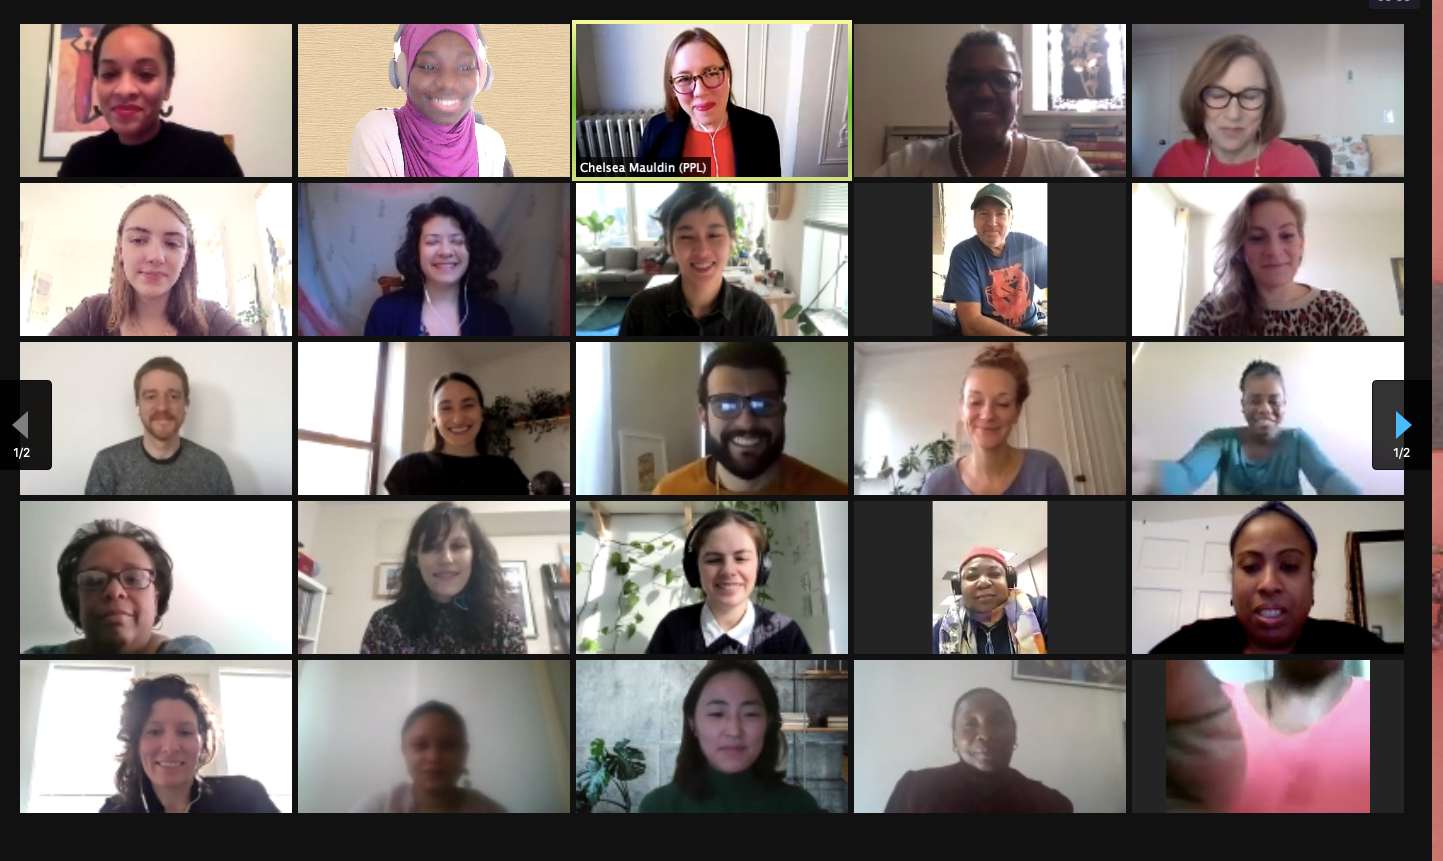 25 faces on a video conference call participating in online Public Policy Lab research during the COVID-19 pandemic.